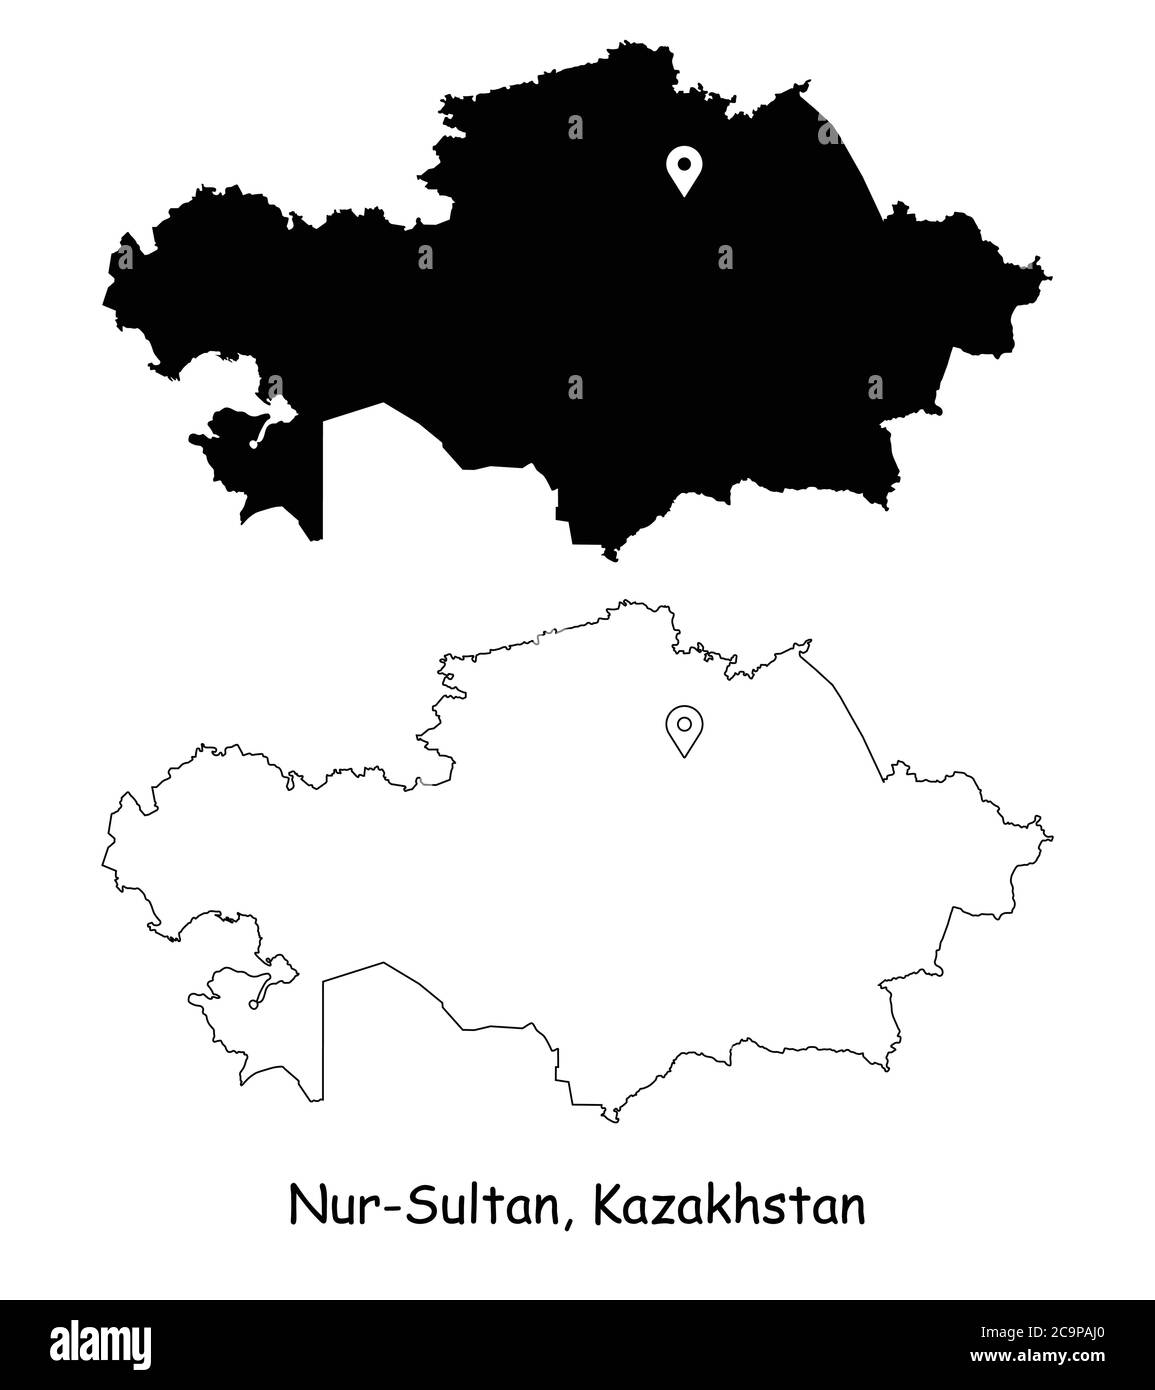 Nur Sultan Kazakhstan. Detailed Country Map with Location Pin on Capital City. Black silhouette and outline maps isolated on white background. EPS Vec Stock Vector